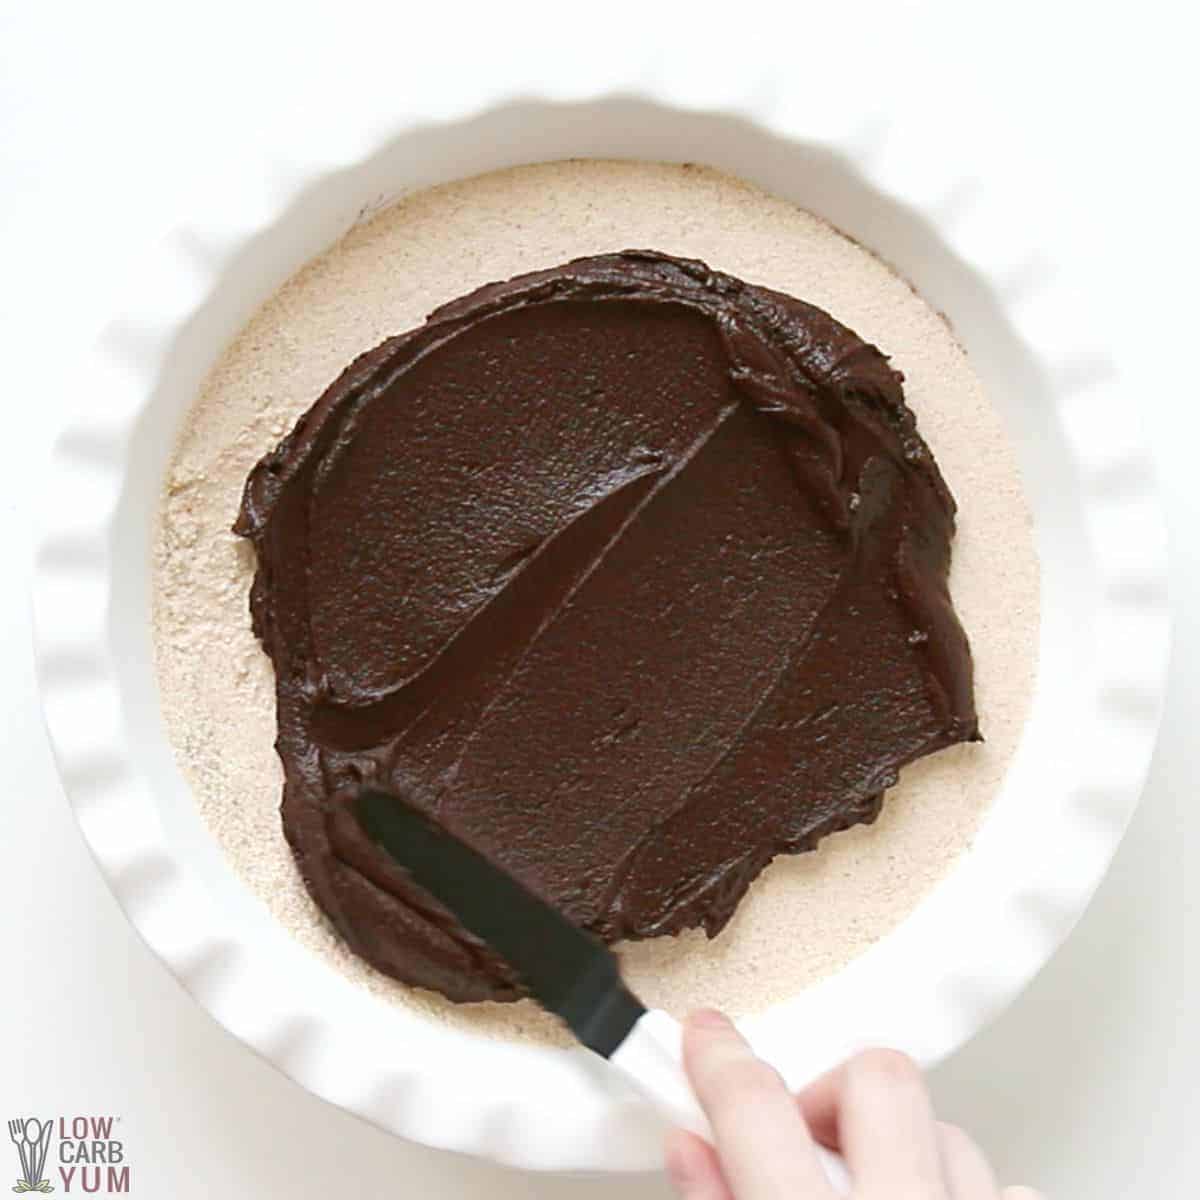 spreading chocolate ganache topping over peanut butter pie filling.